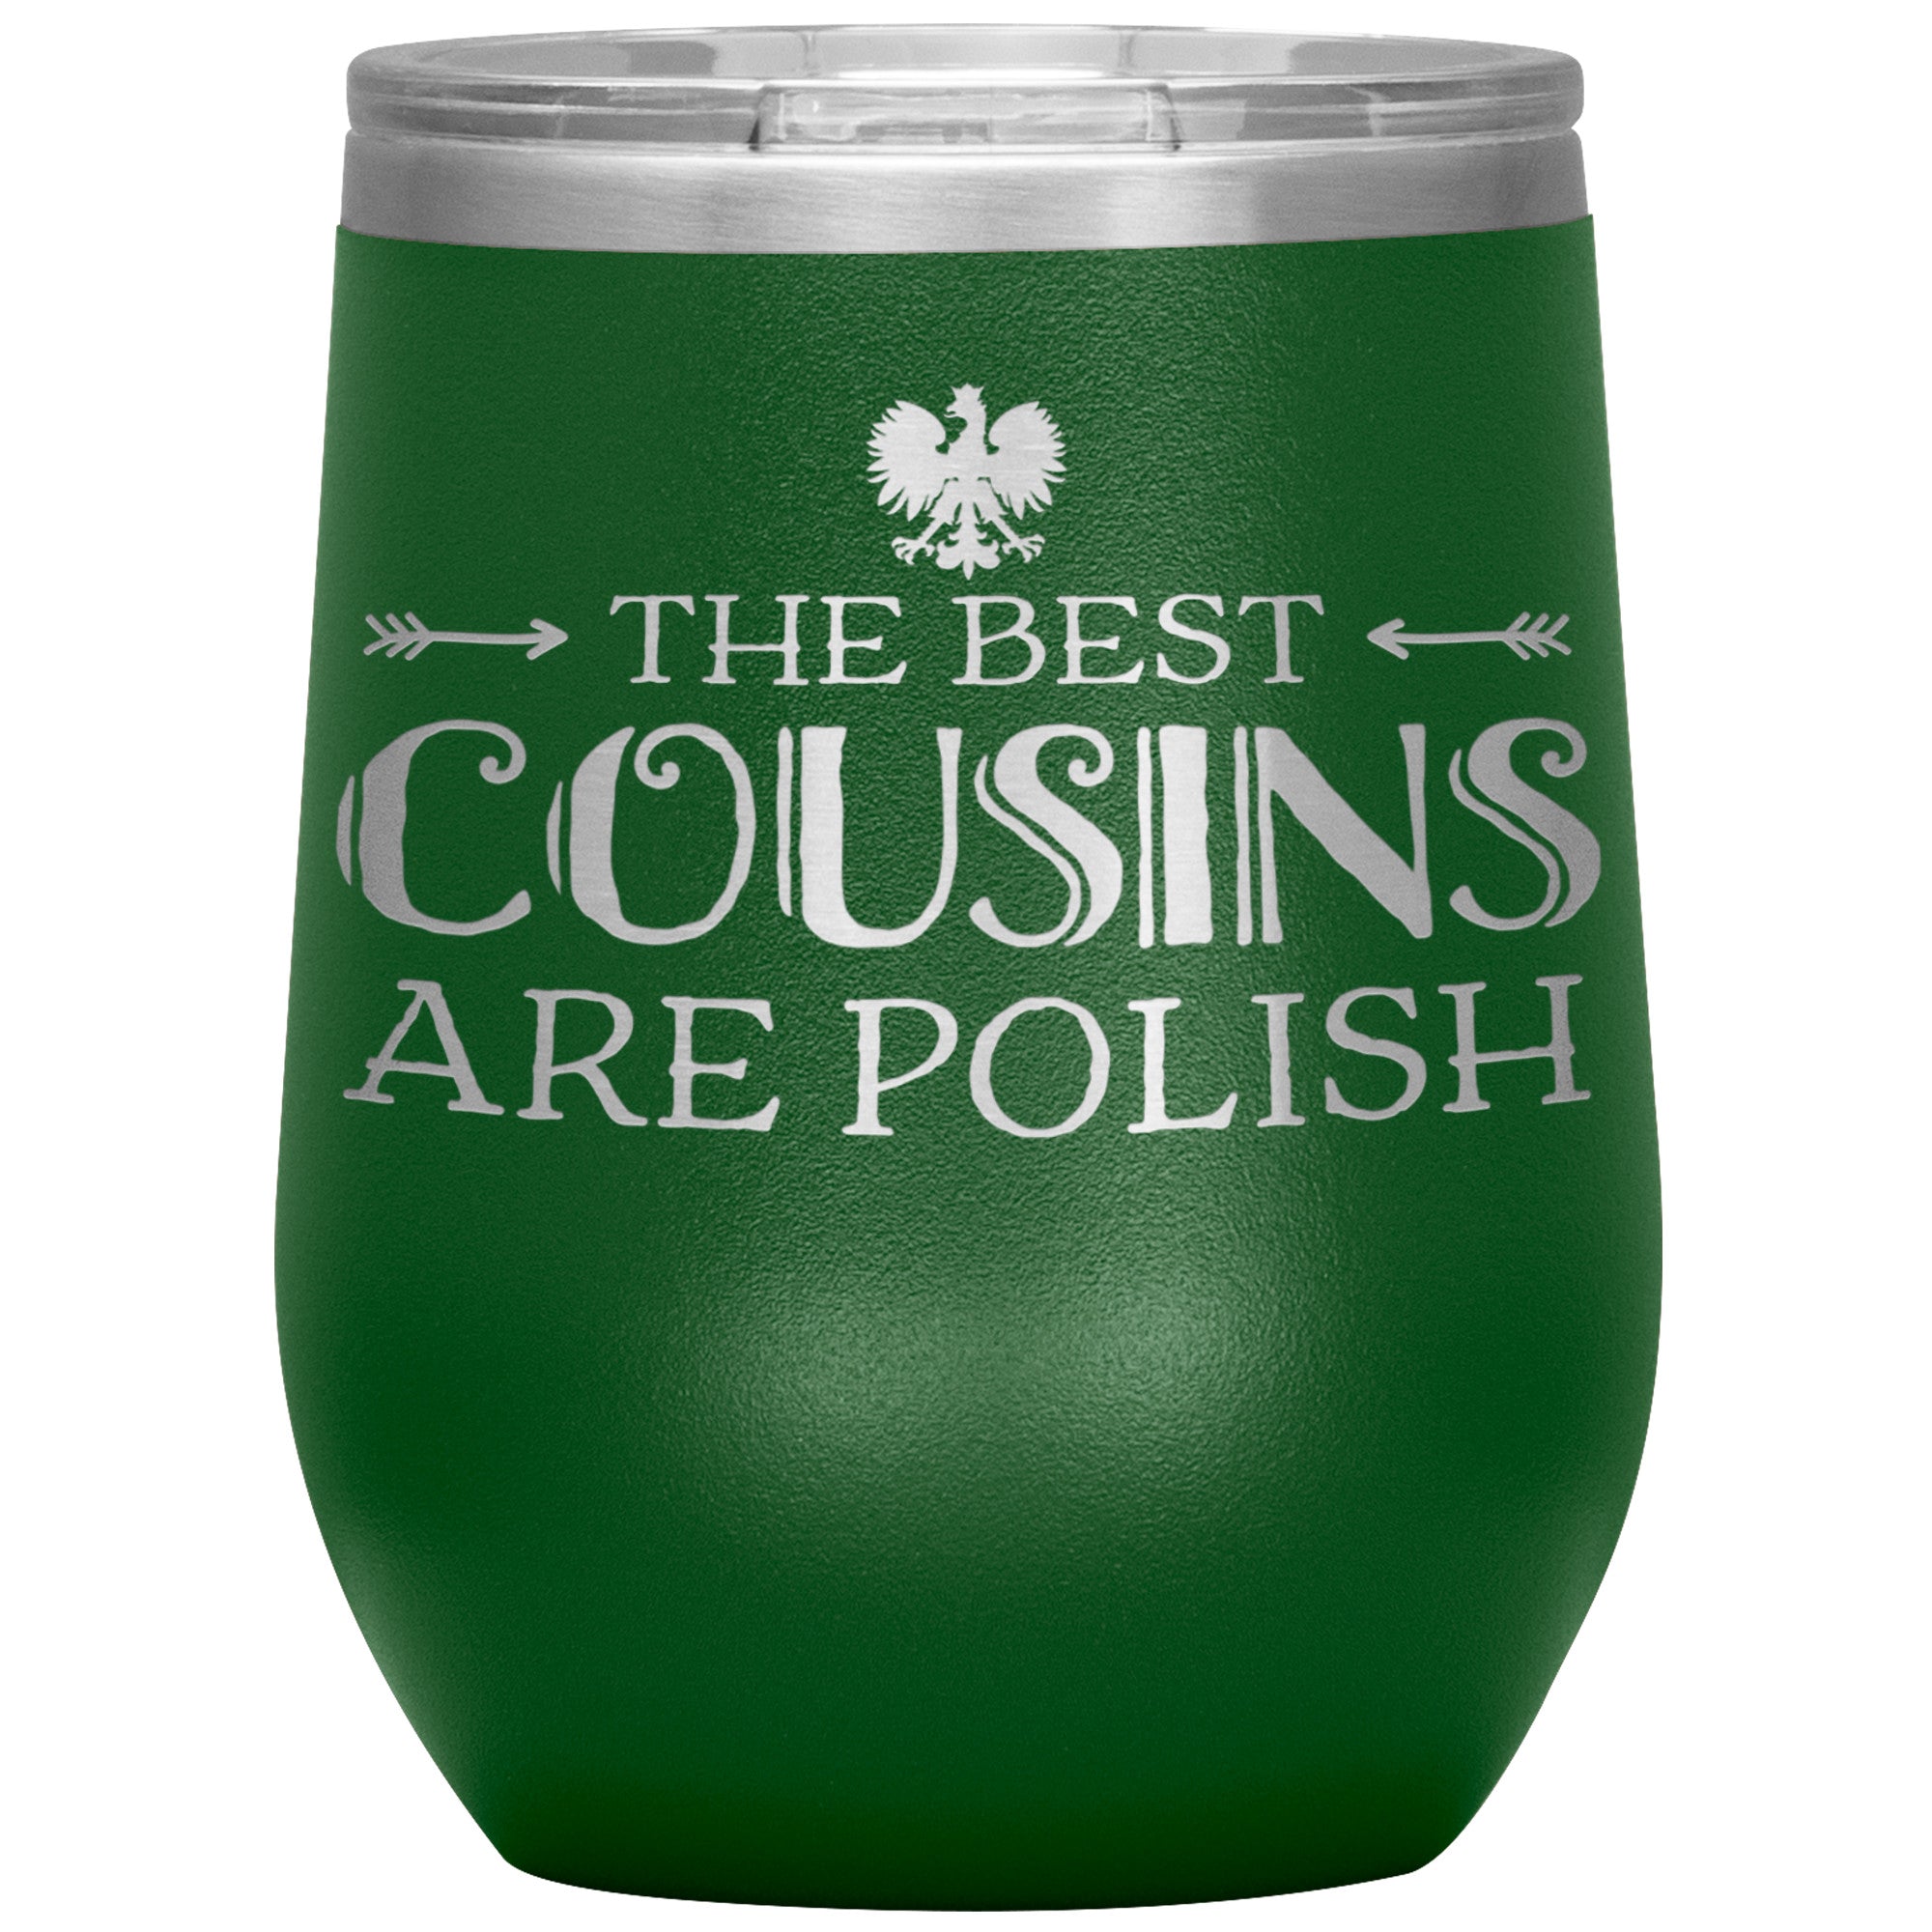 The Best Cousins Are Polish Insulated Wine Tumbler Tumblers teelaunch Green  